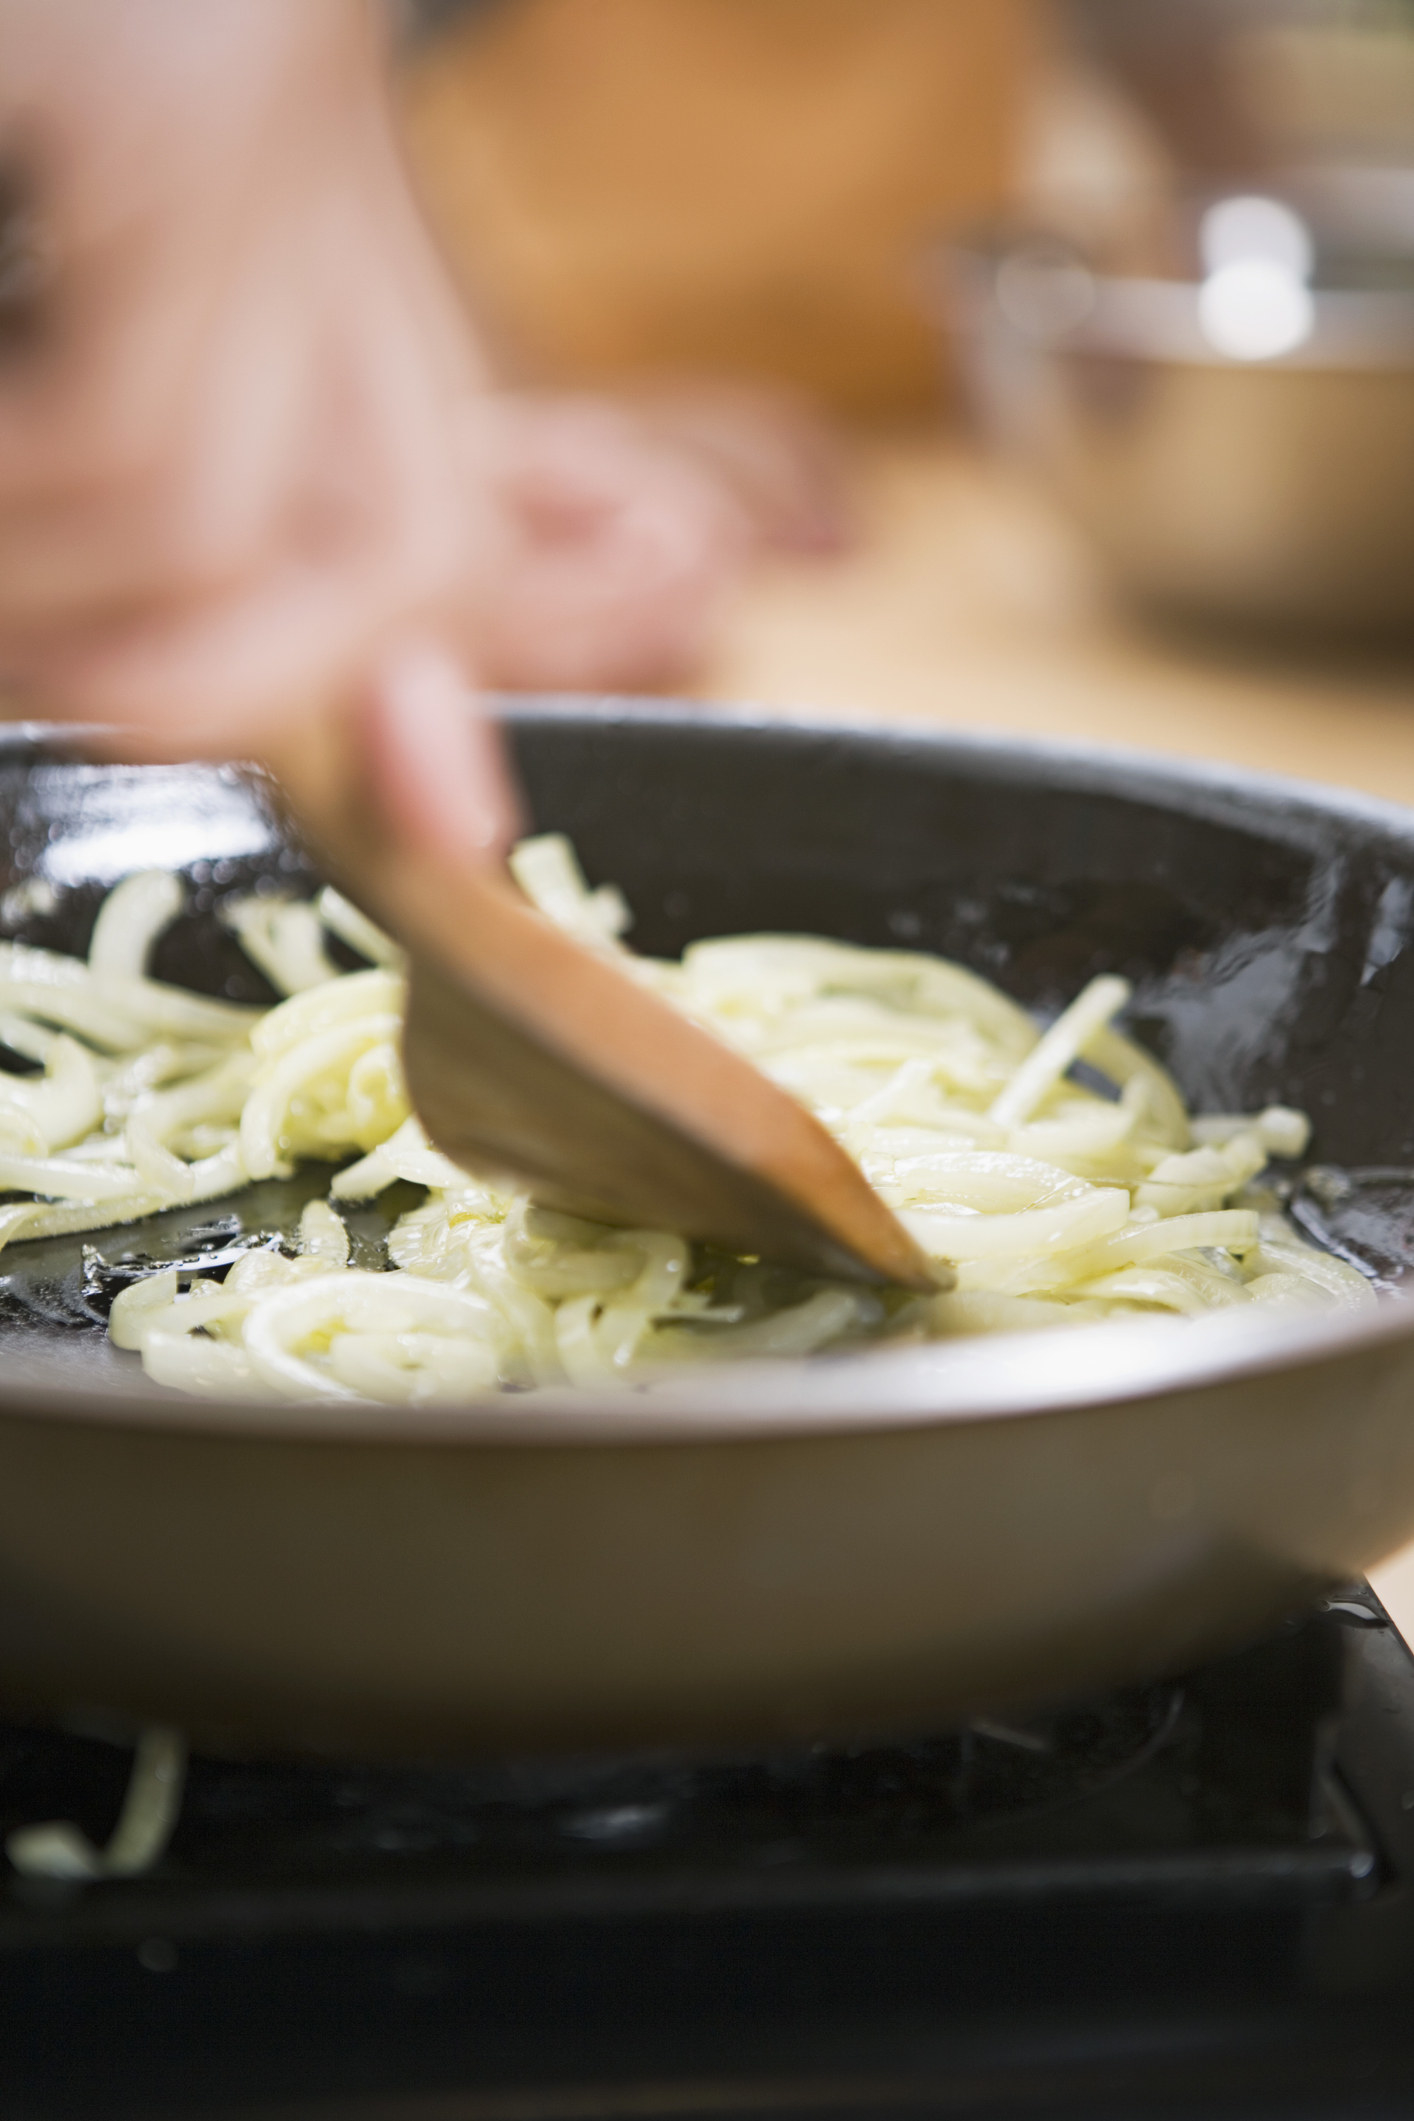 Onions sautéing in a skillet.